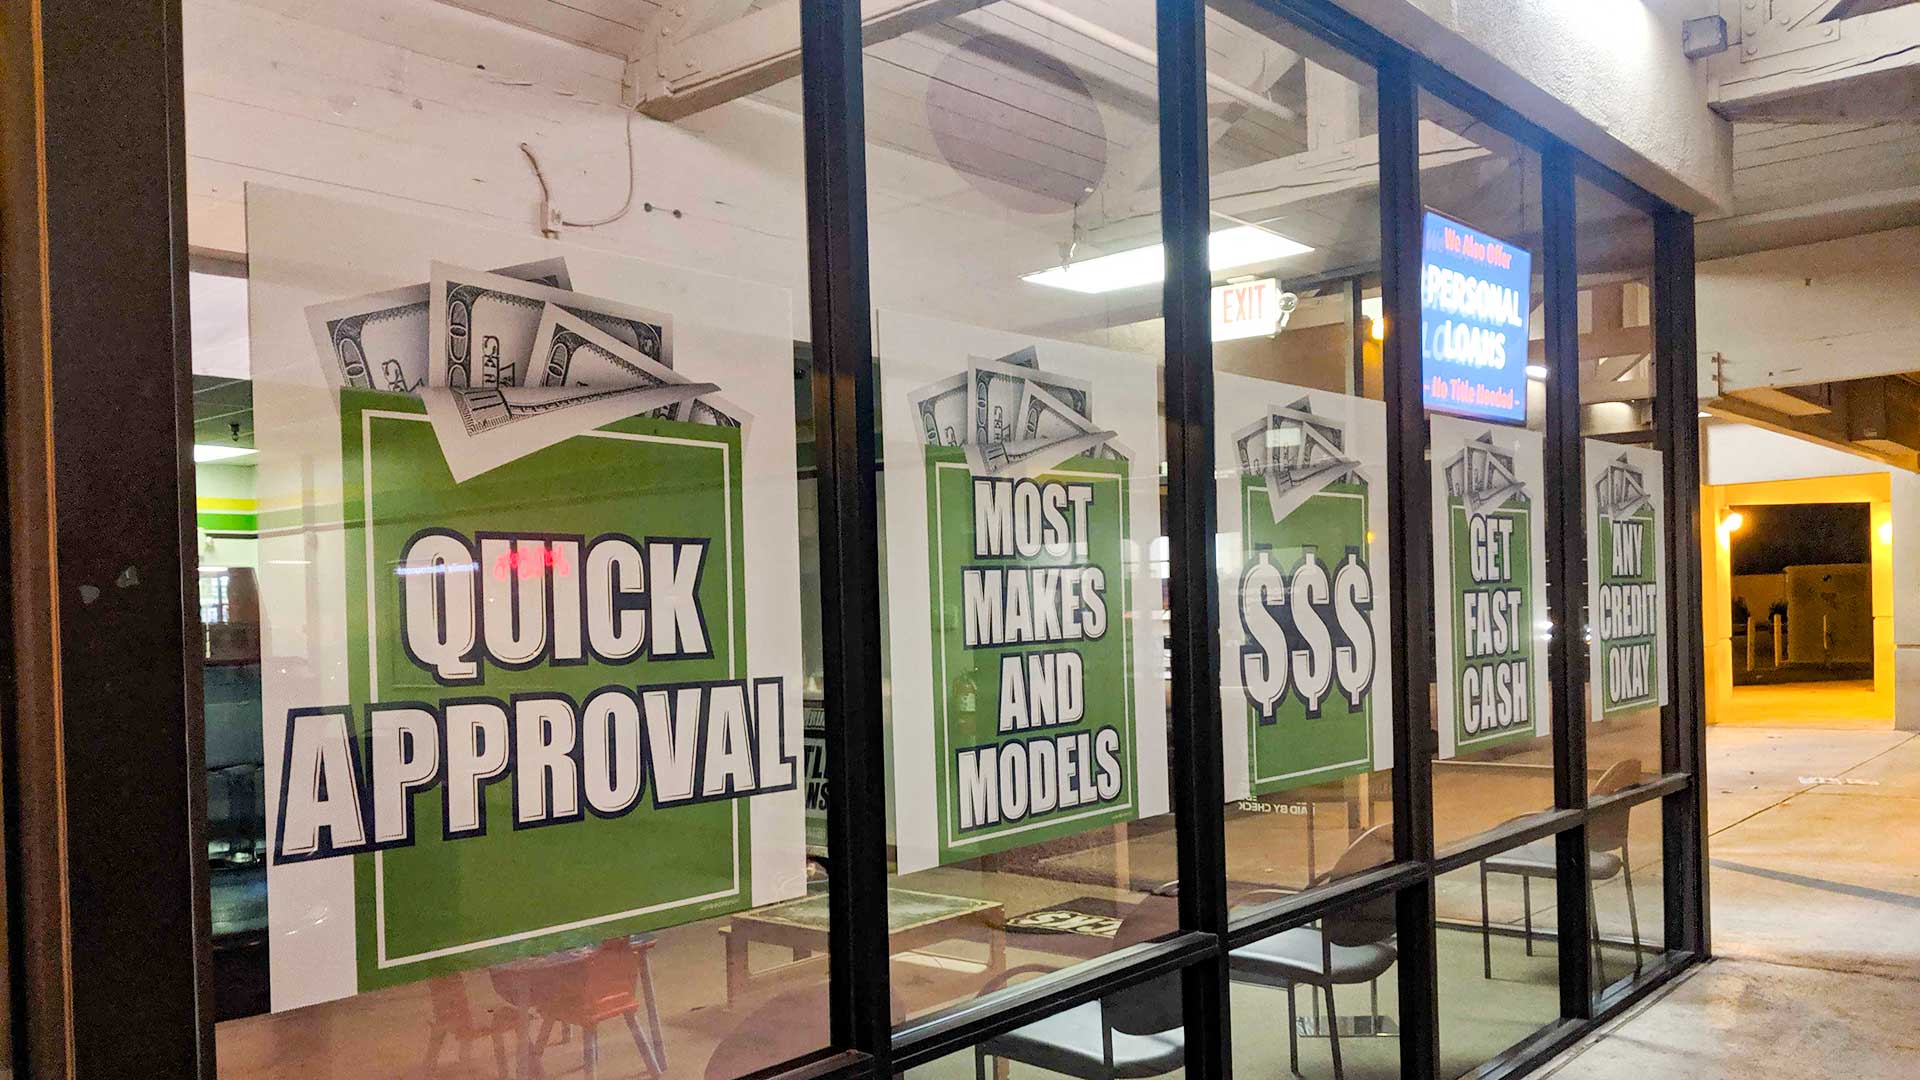 A storefront window advertising auto title loans in Tucson, July 2019.